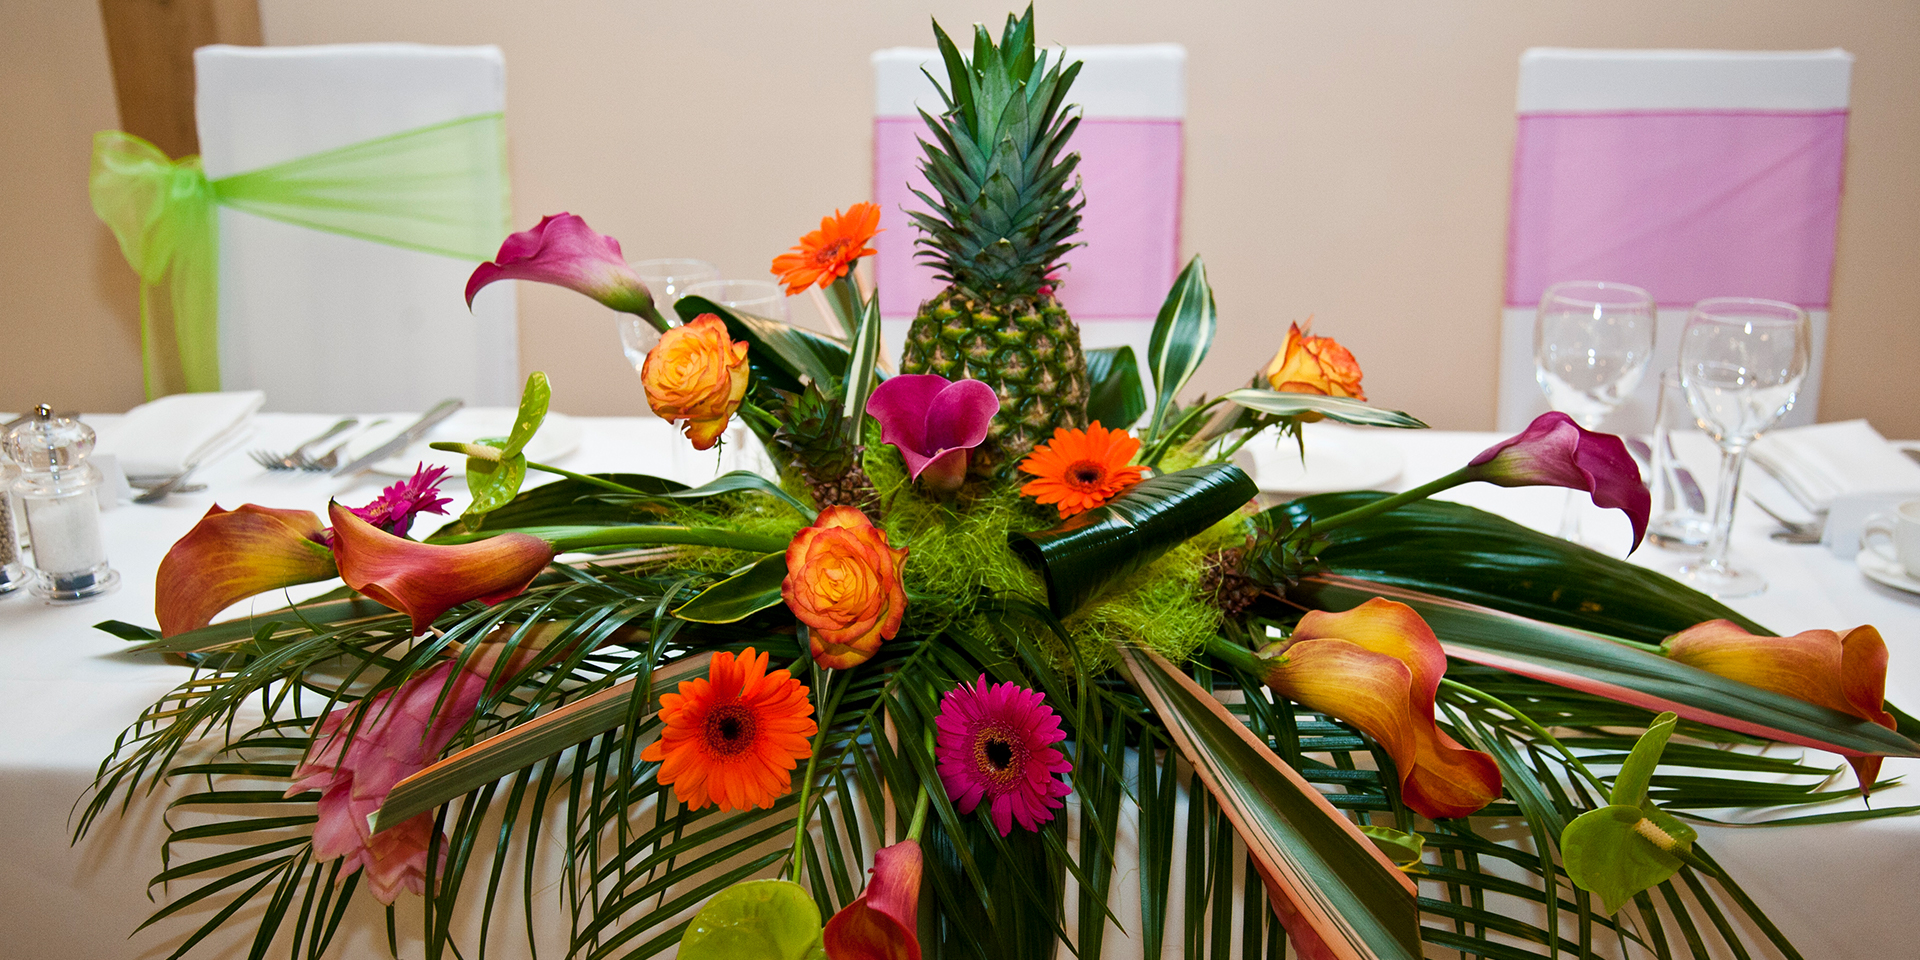 Heather and Damien found the perfect venue in Rivervale Barn where they held their tropical inspired wedding